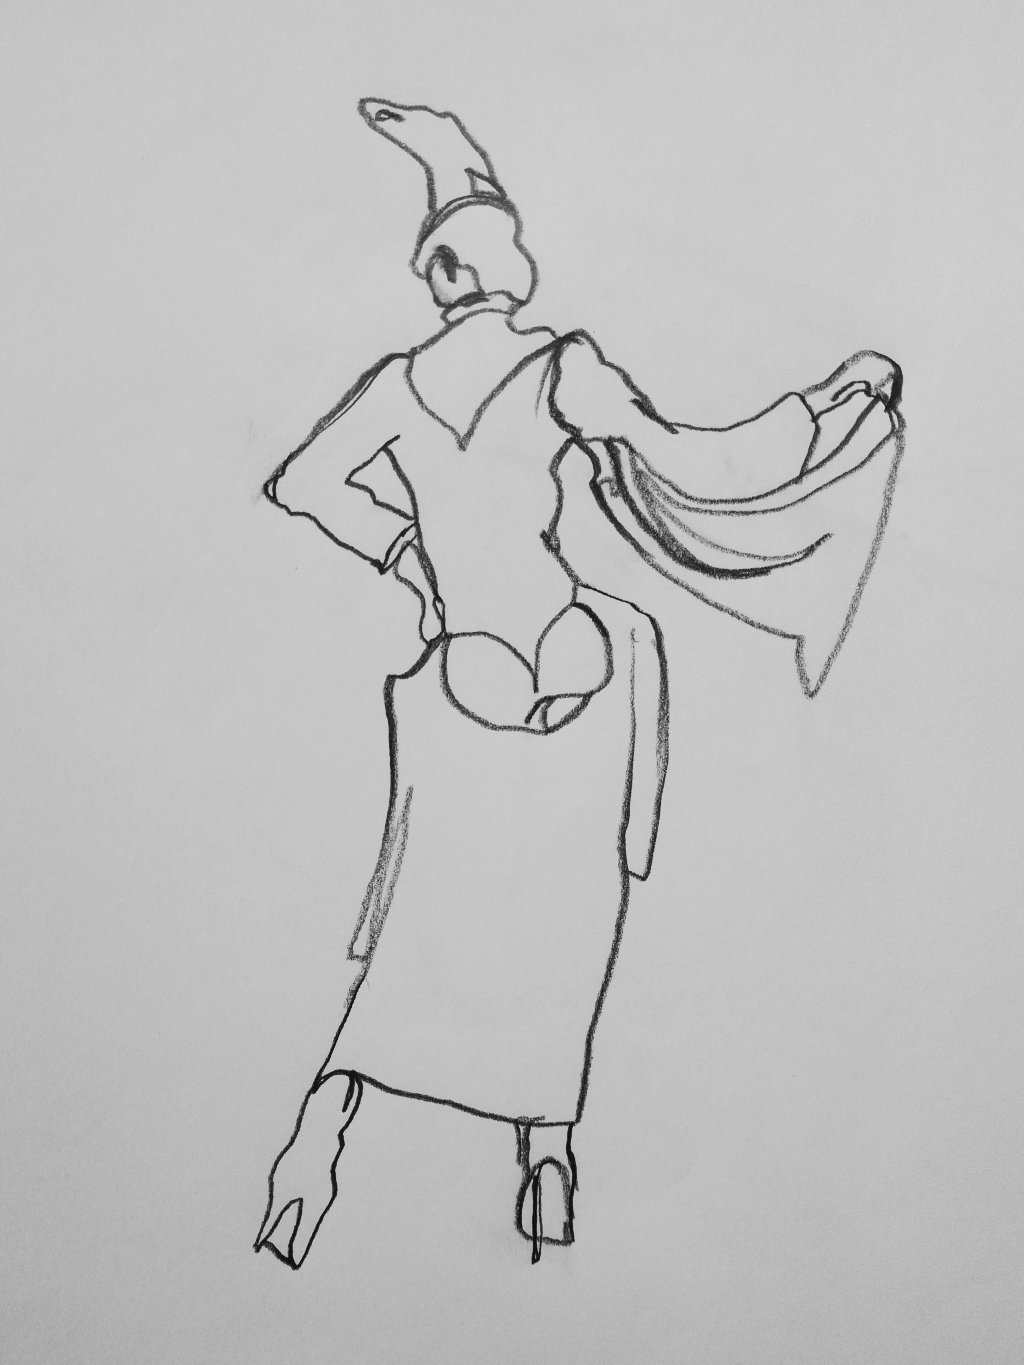 On the runway pencil drawing